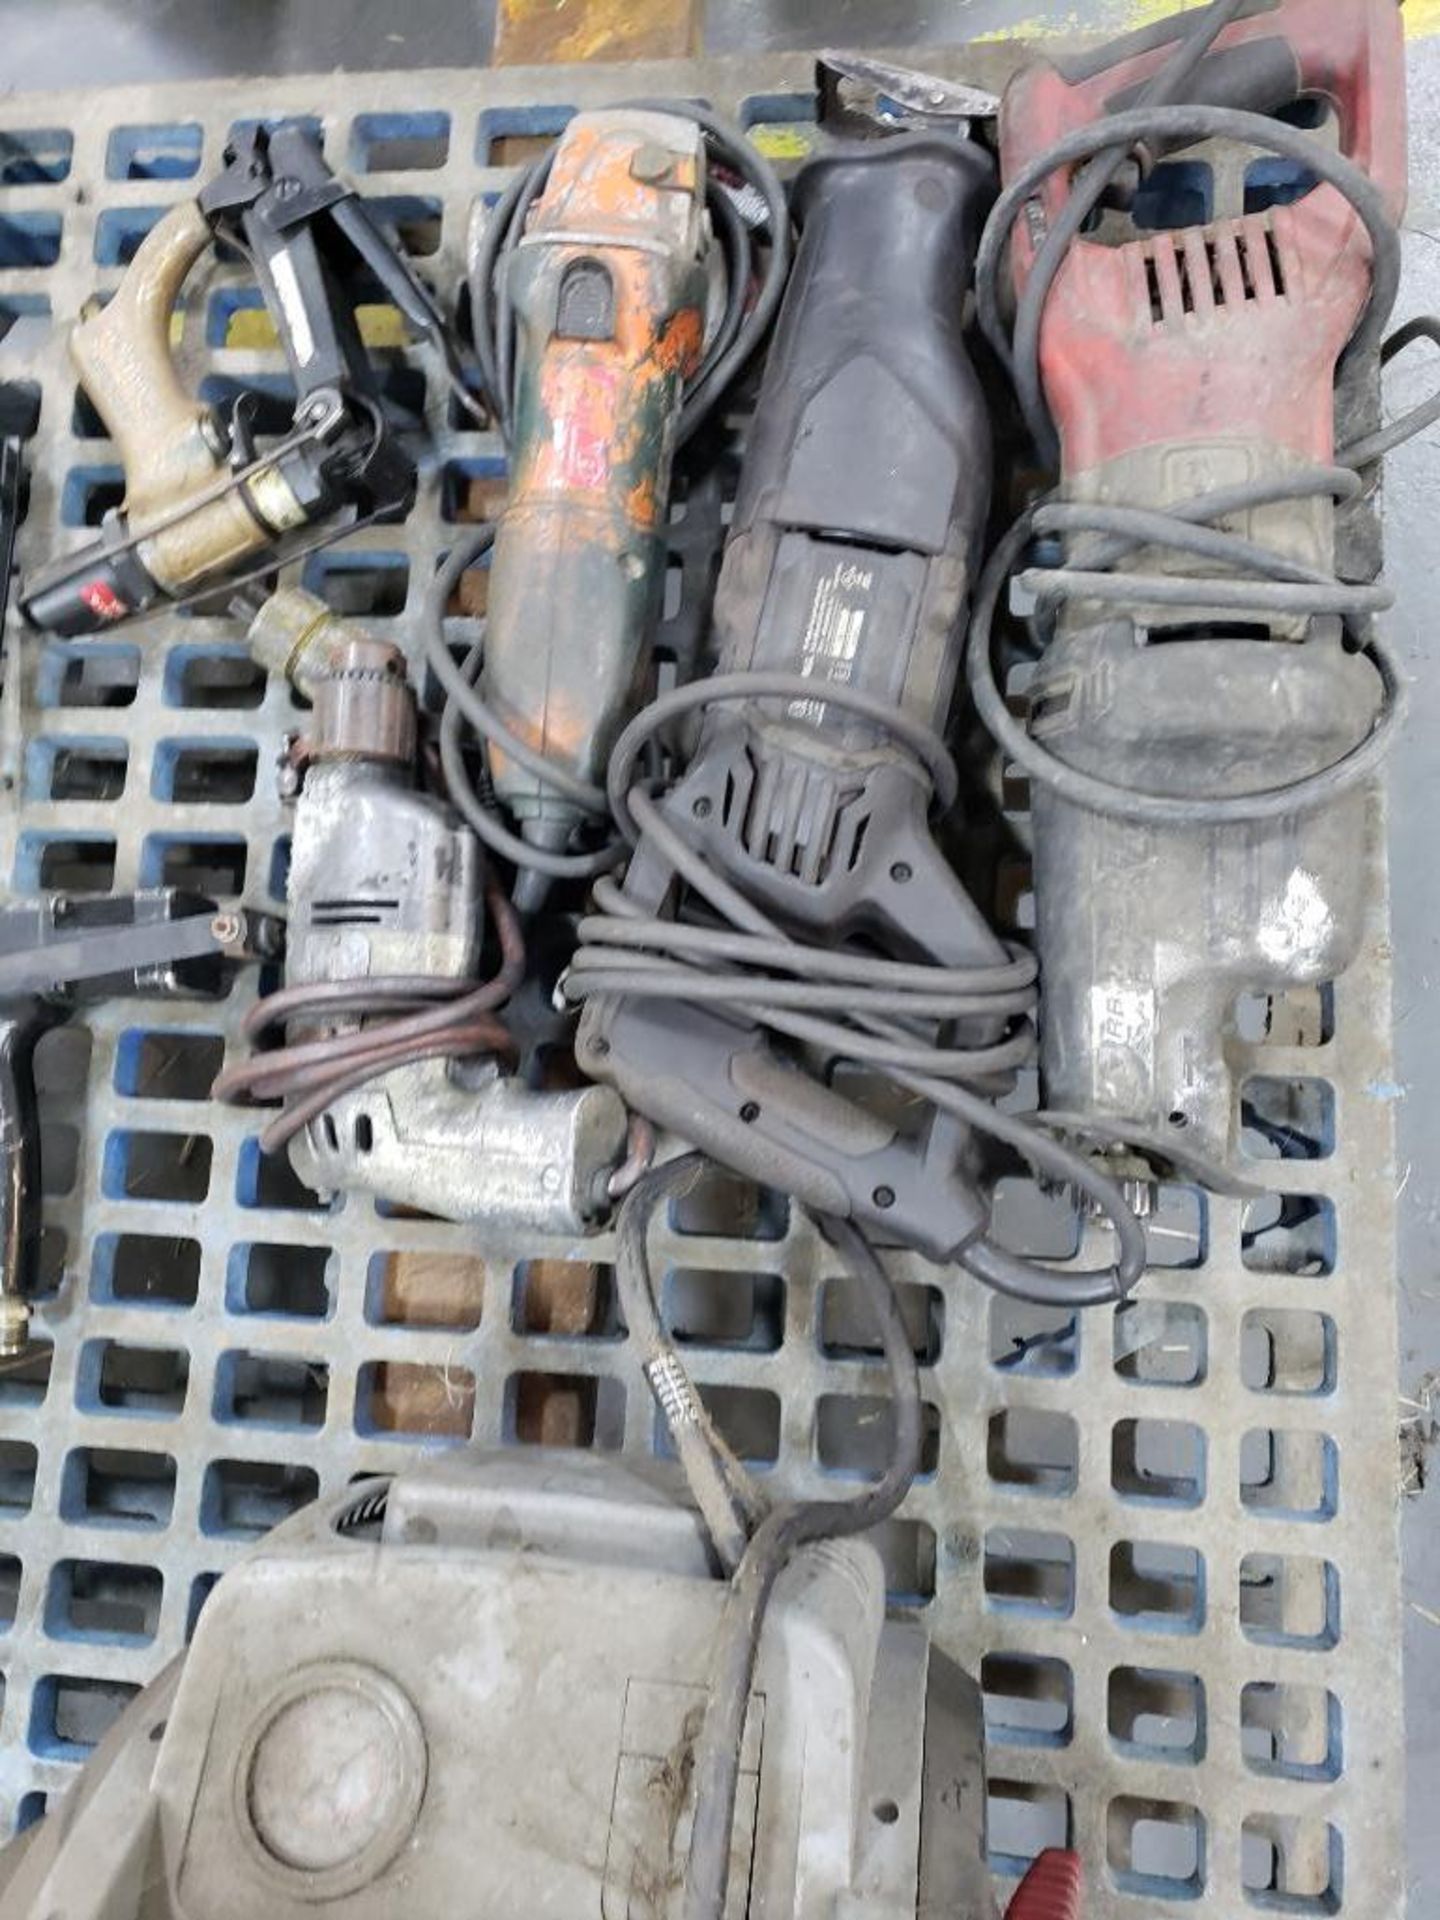 Pallet of assorted power tools, staple guns, box of staples, and charger. - Image 6 of 7